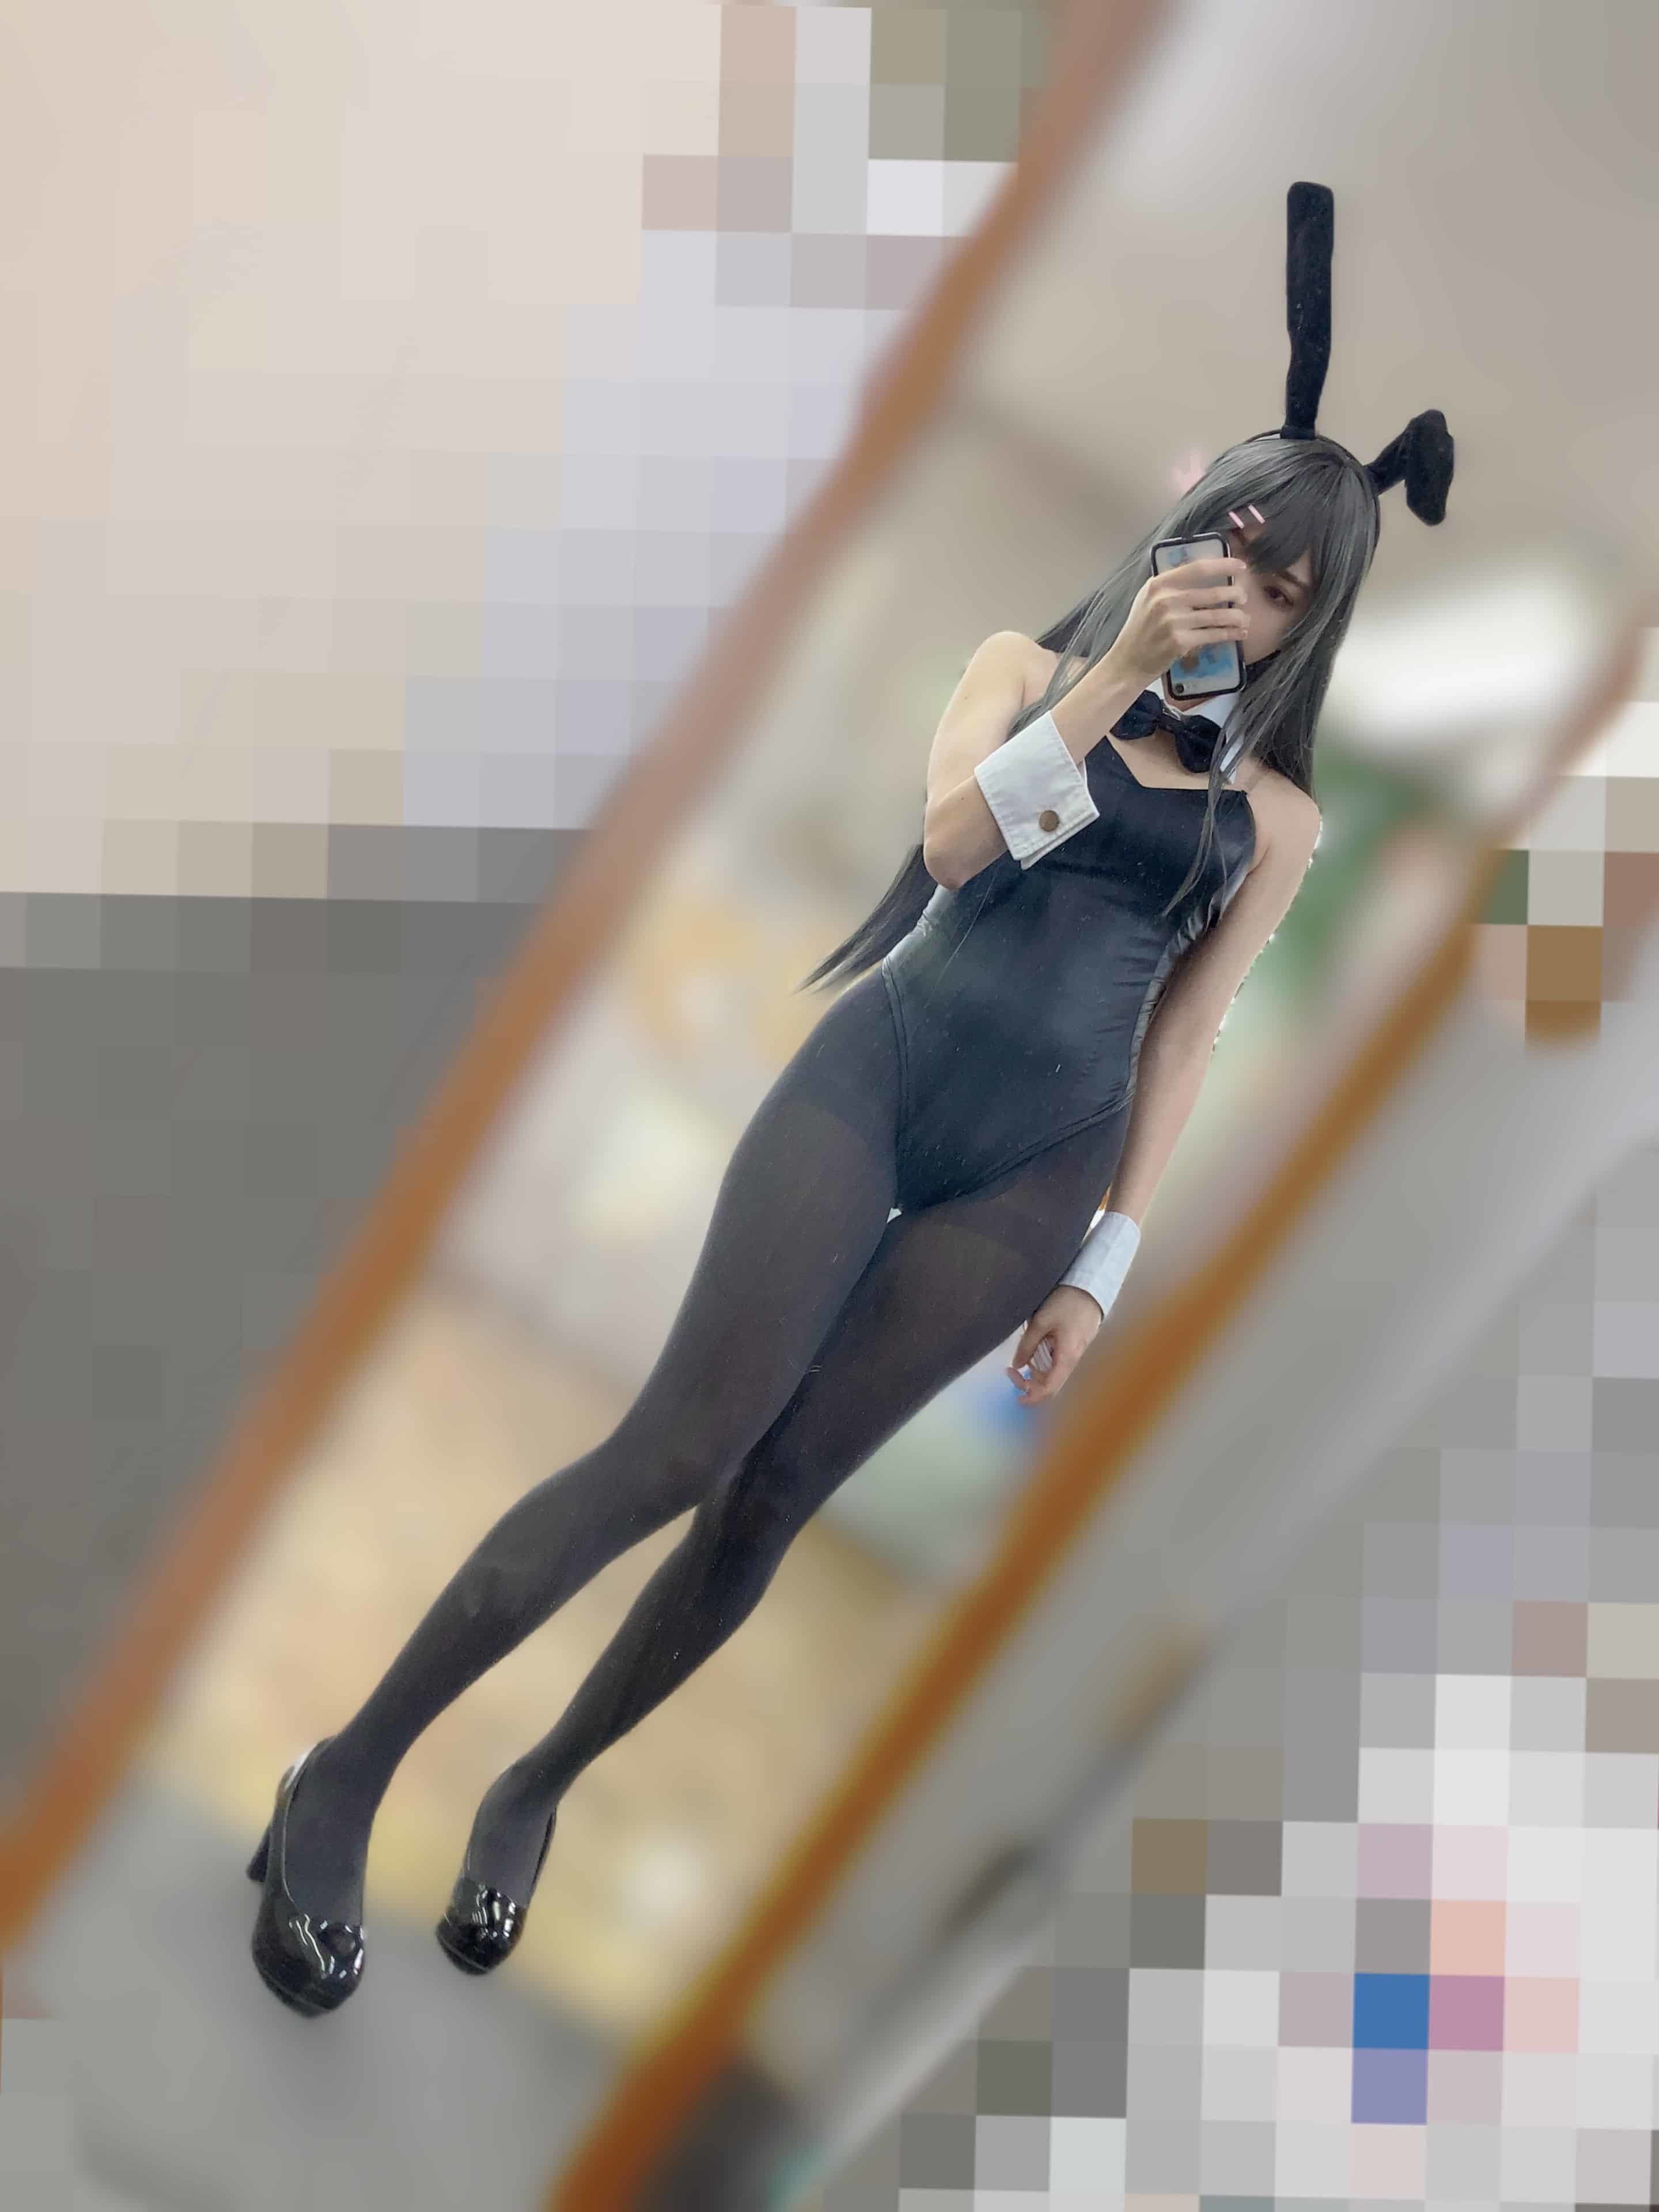 Today is Bunny Girls' Day in Japan